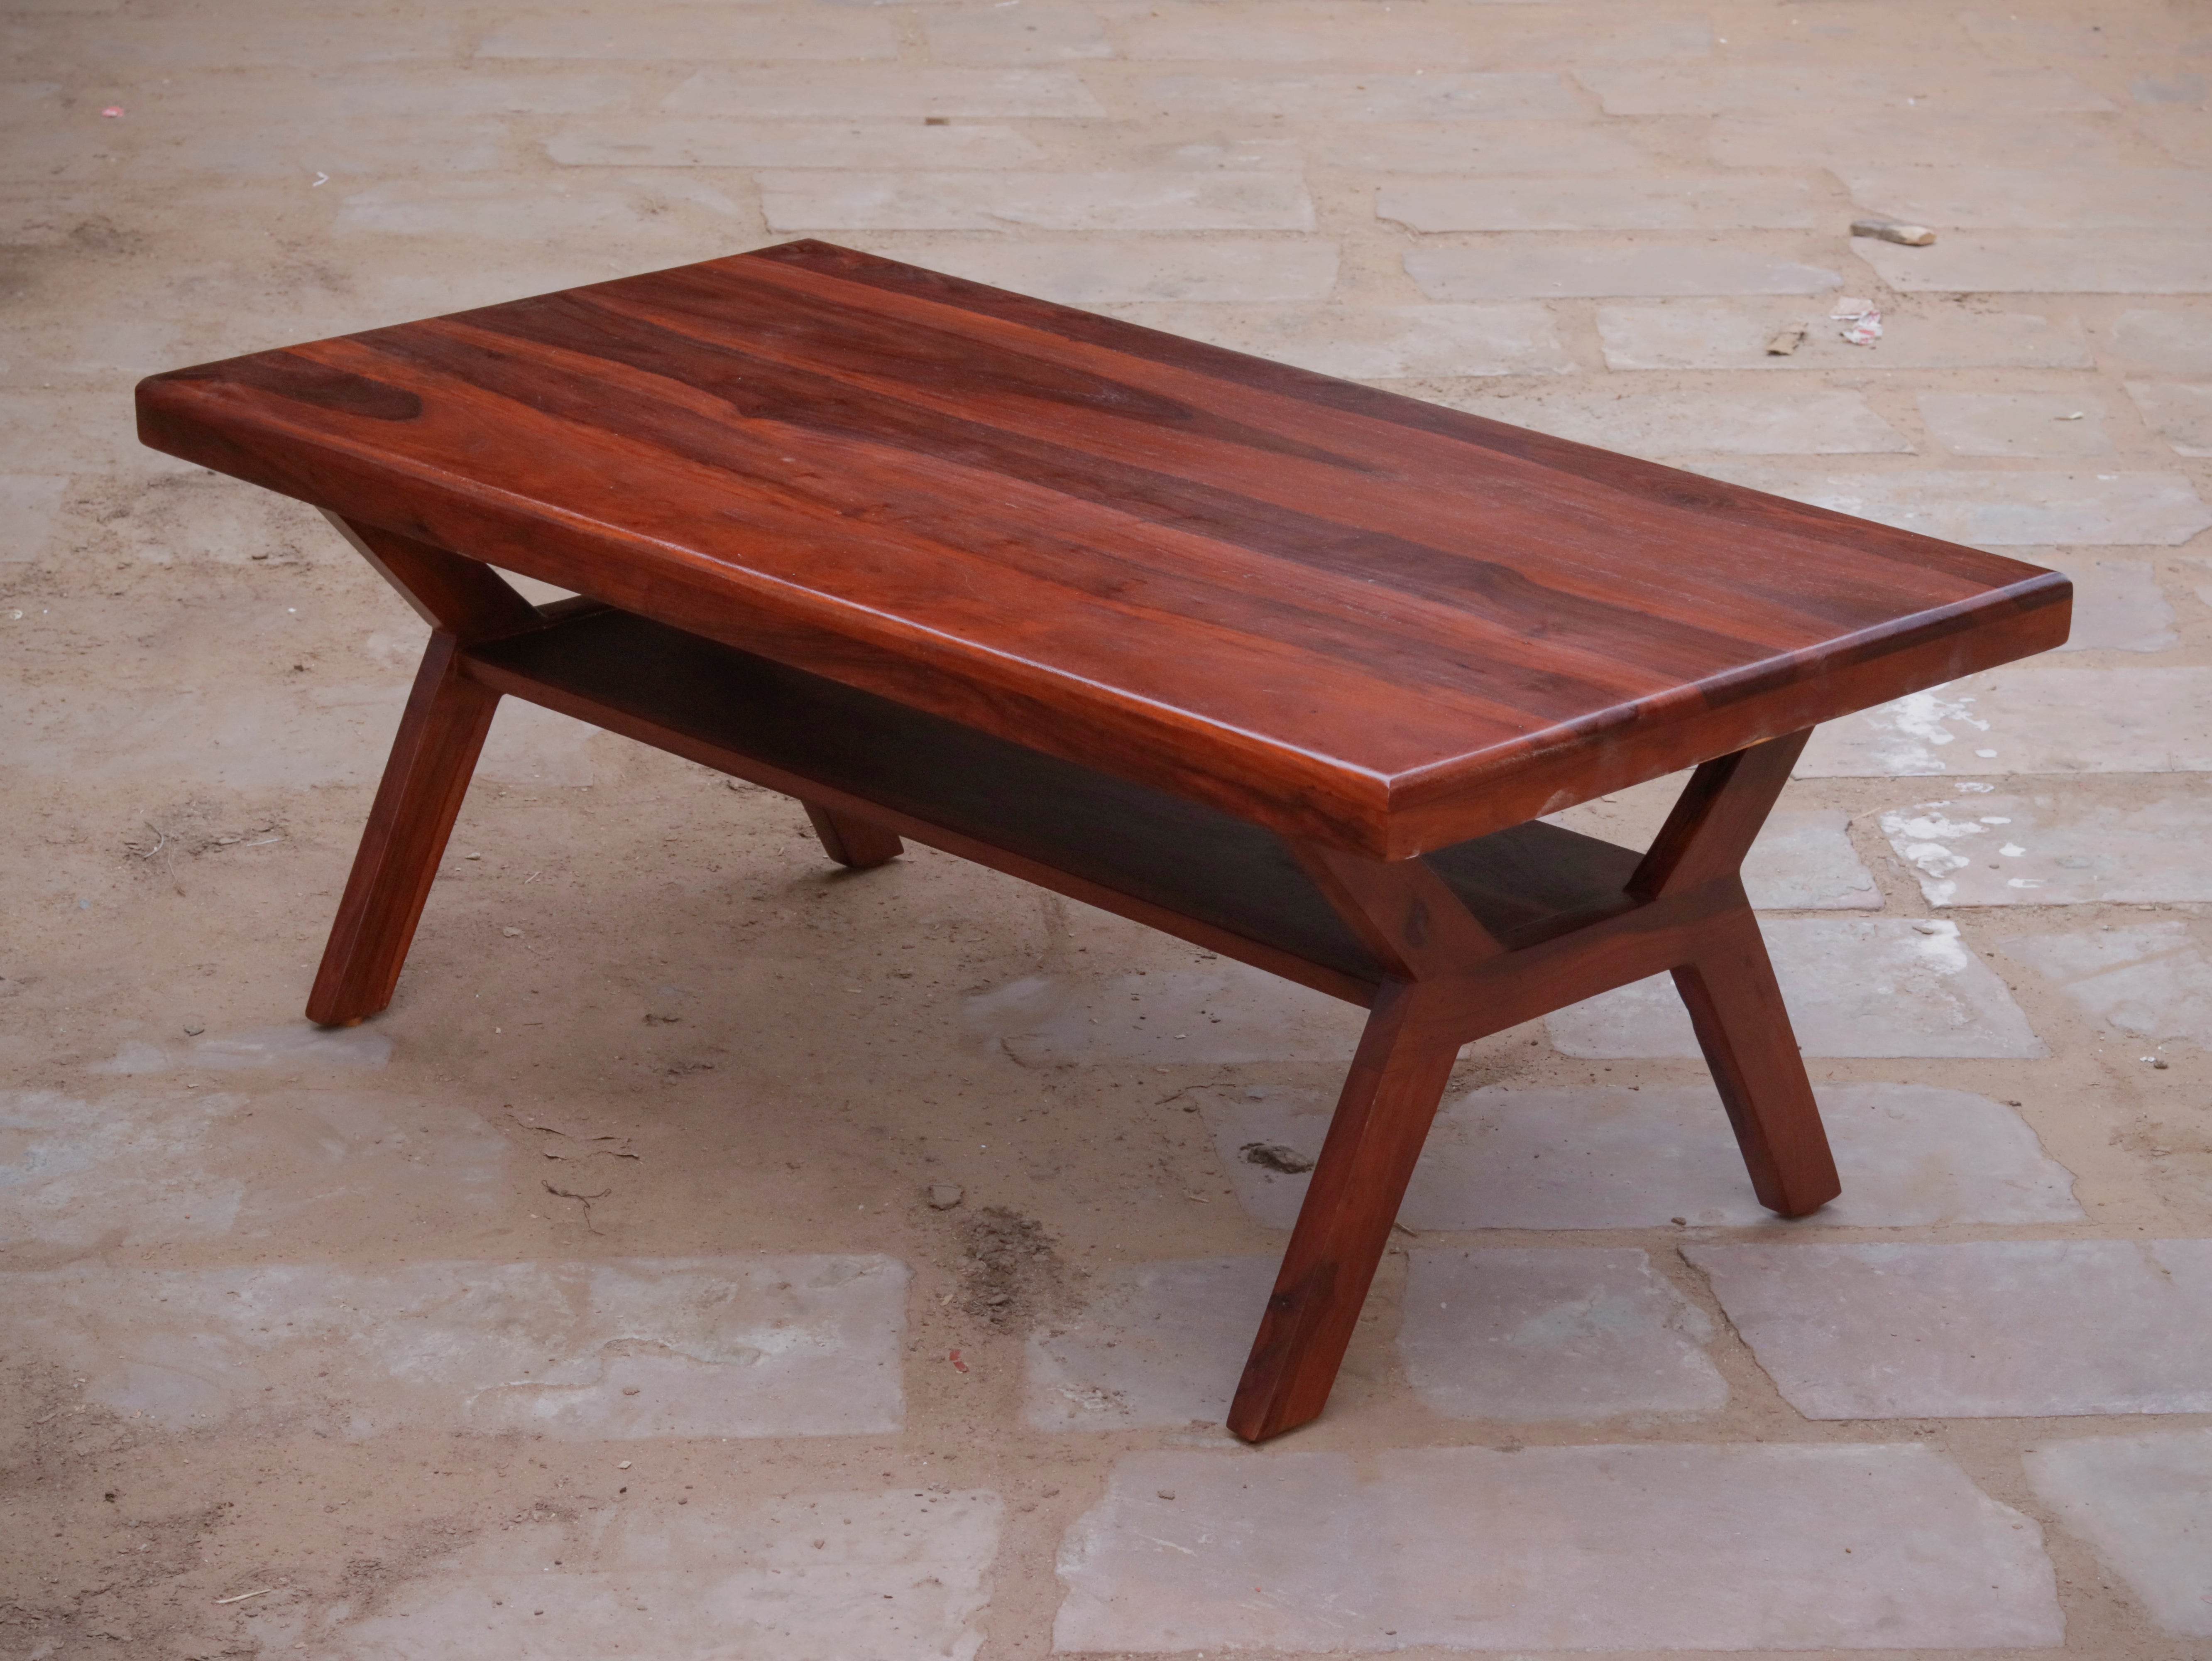 Classic Natural Light Finished Handmade Wooden Coffee Table Coffee Table